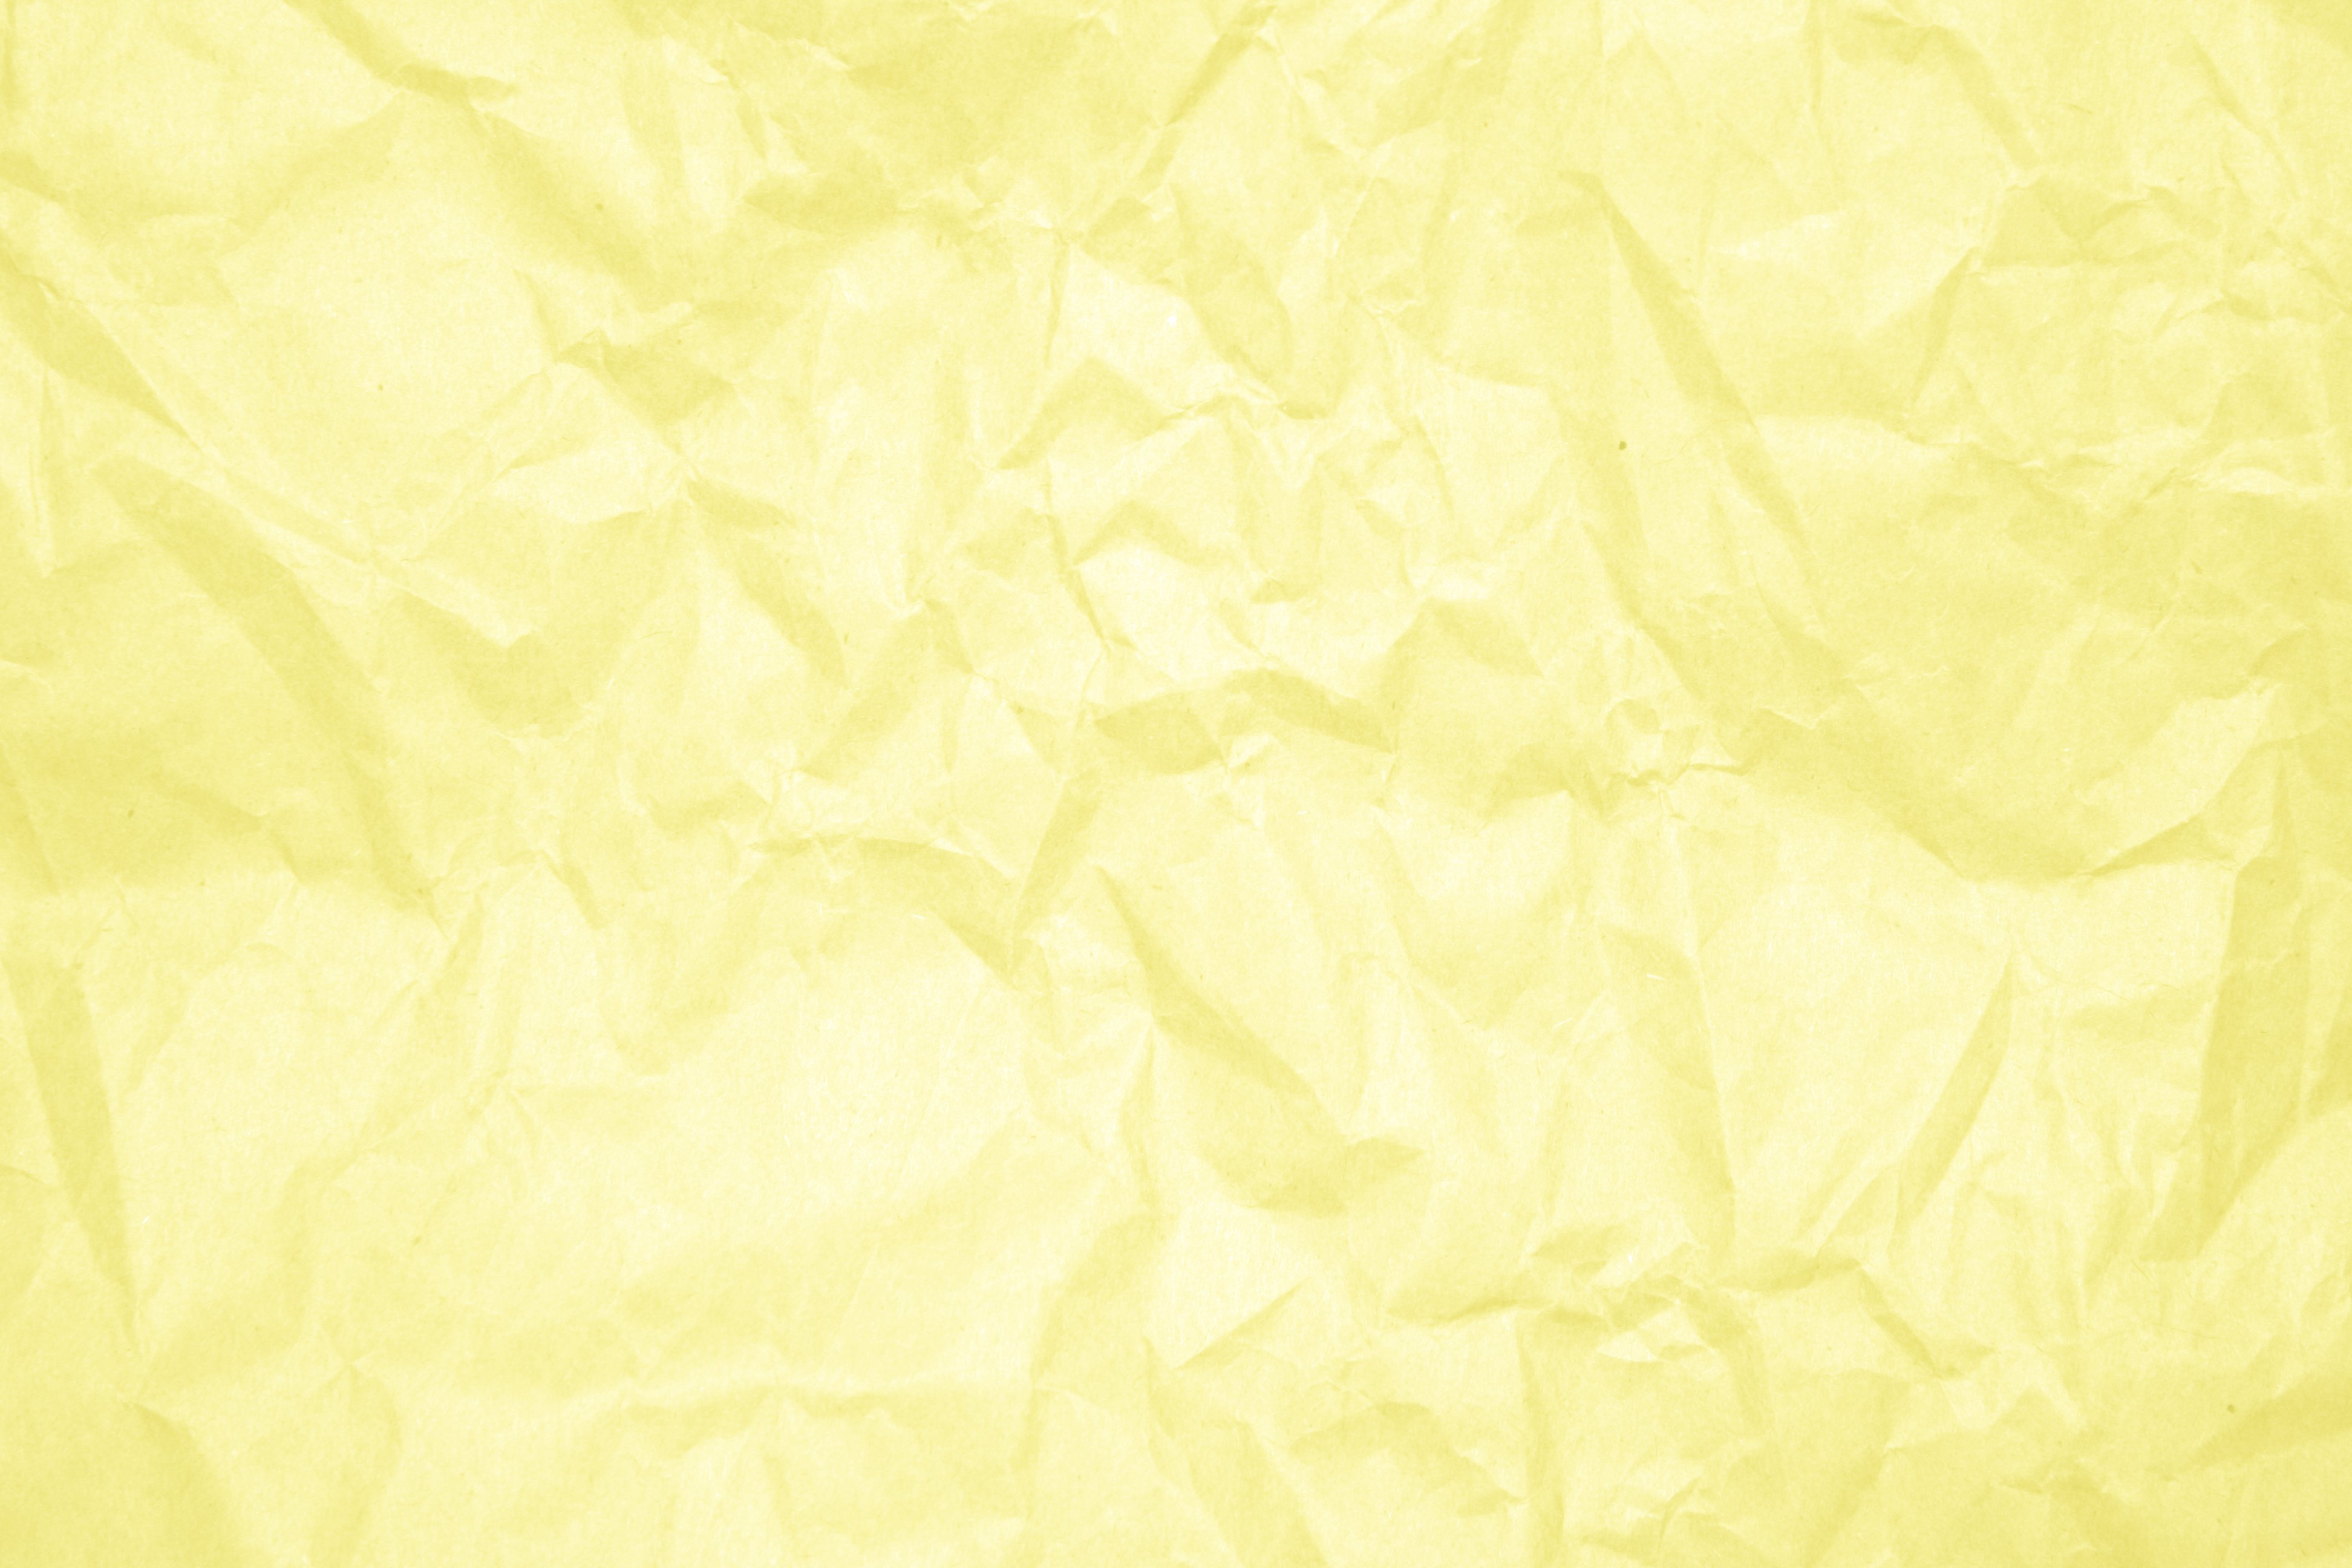 yellow paper texture